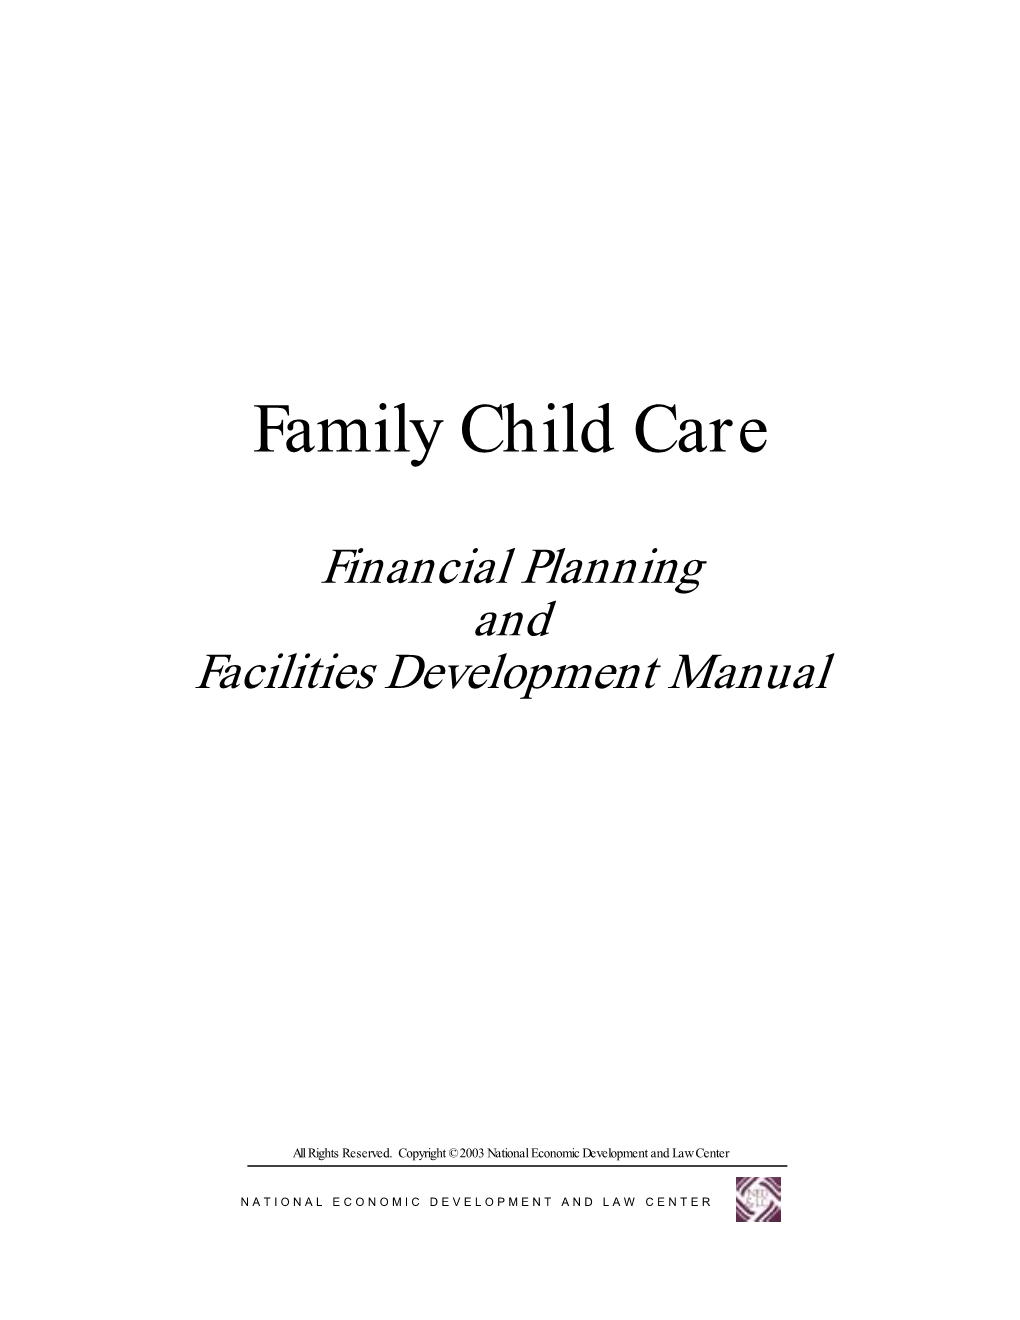 Family Child Care Financial Planning and Facilities Development Manual